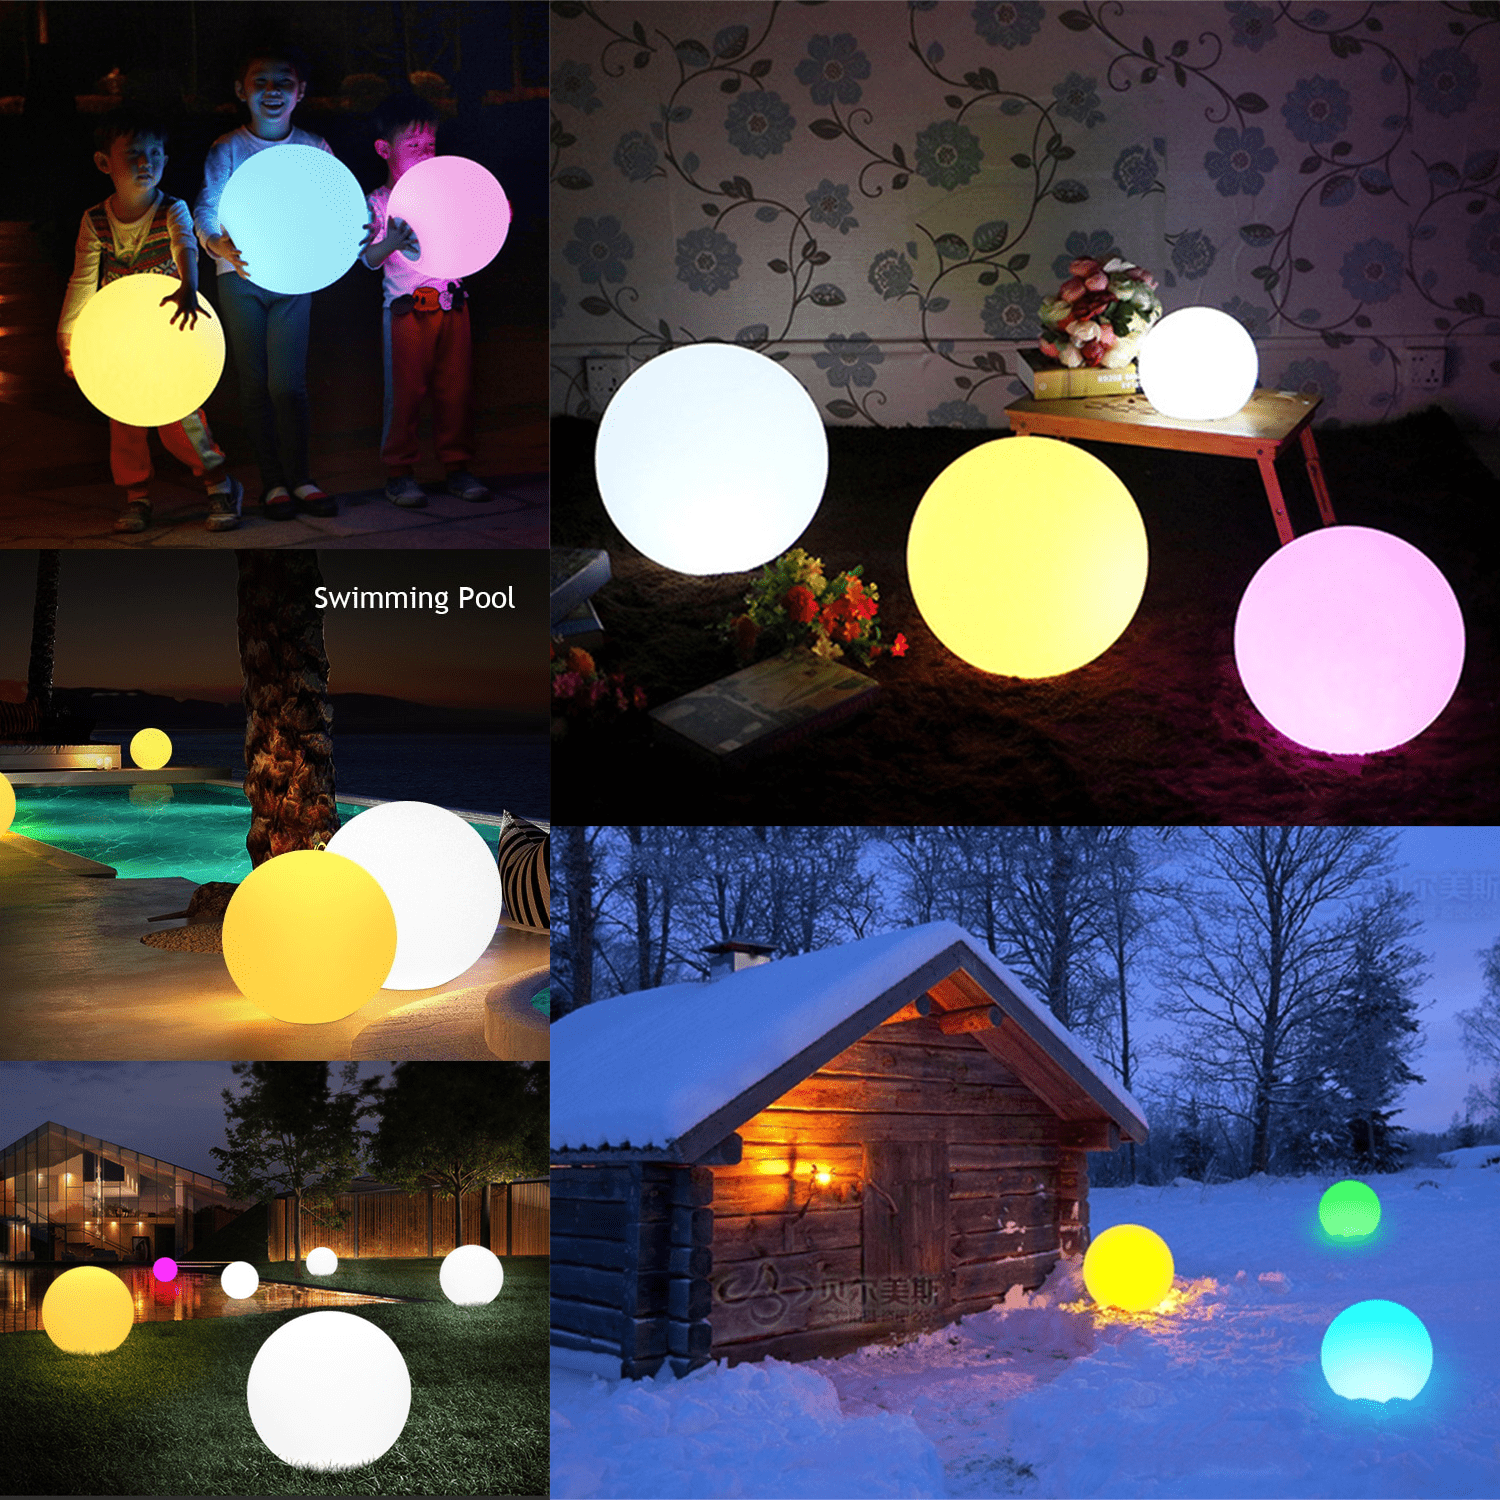 4 Lights Anonion 2 Pack 16 Glow Beach Ball 13 Colors Changing LED Light Up Floating Inflatable Pool Toys with Remote Glow in The Dark Home Patio Garden Swimming Party Outdoor Games Decorations